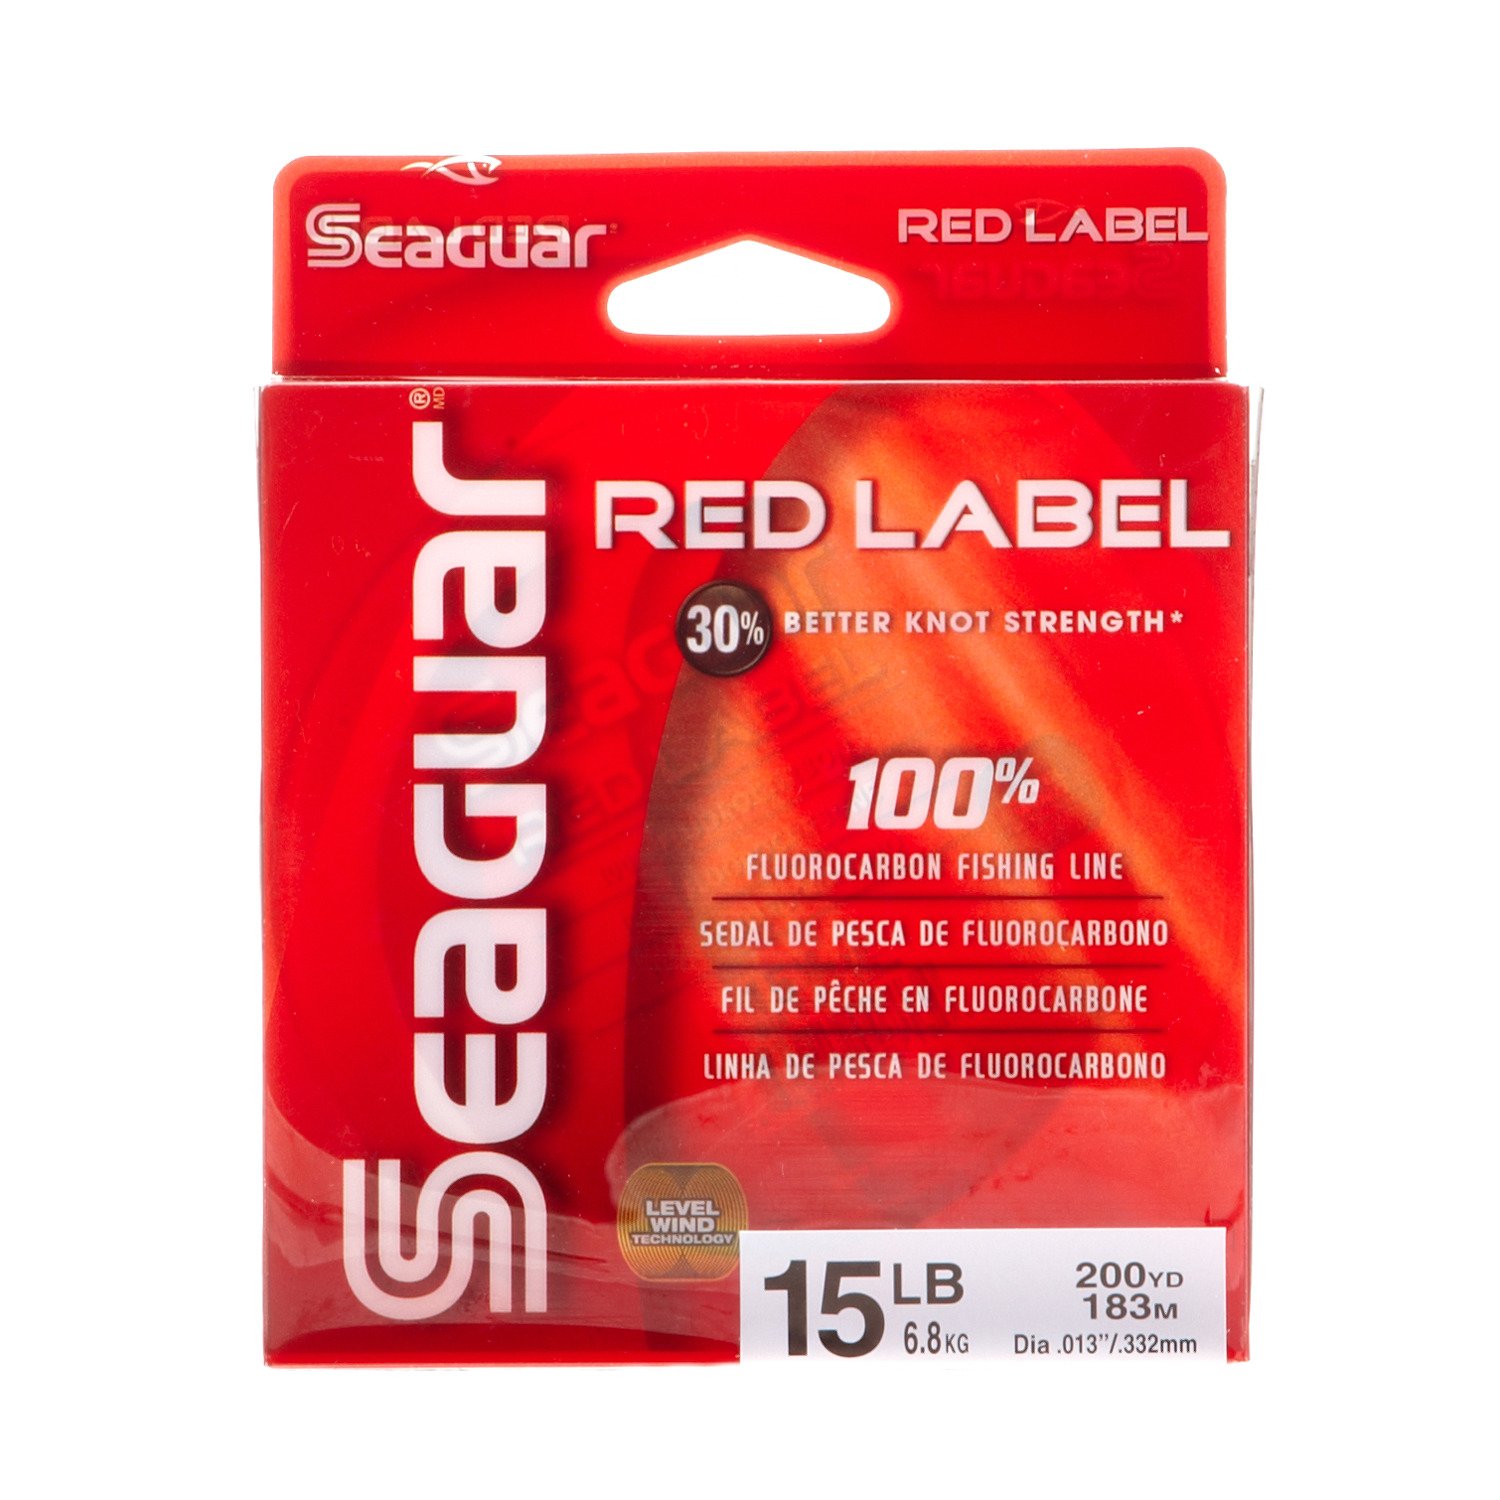 Seaguar Red Label 12Lb 200Yds Performance Fishing Line - Simpson Outfitters